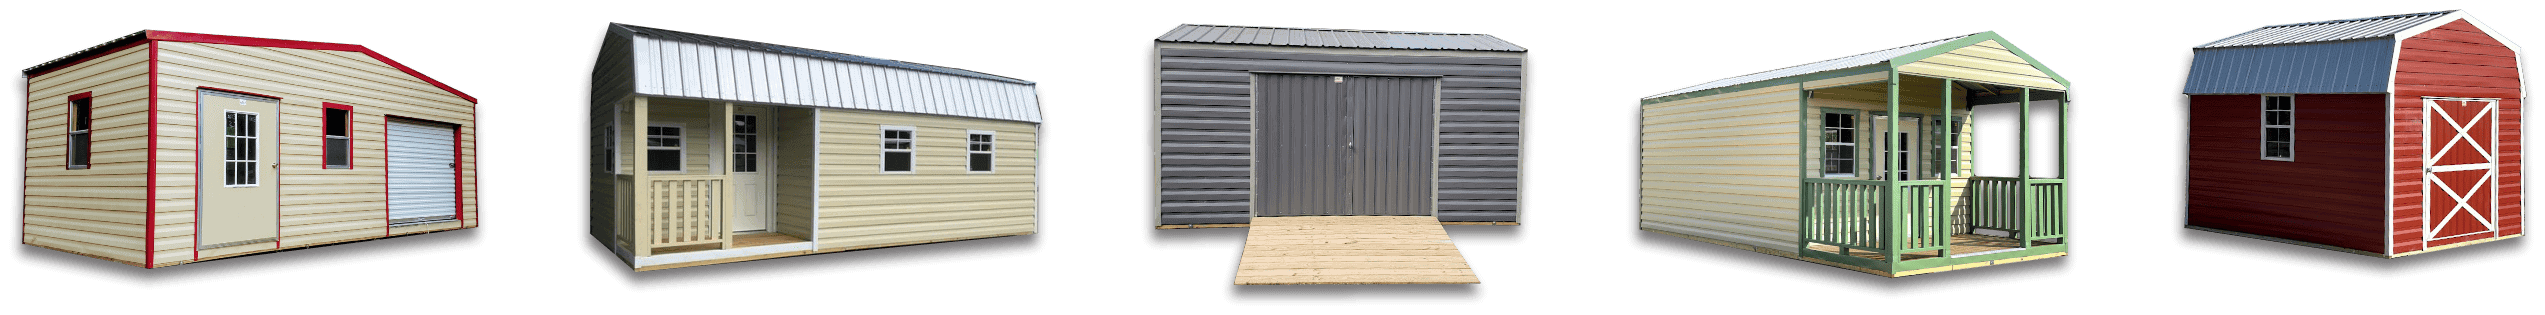 12x40 Portable Storage Sheds for Sale - Find Your Ideal Storage Solution with Robin Sheds. Browse Our Variety of Shed Styles Including 12x40 Storage Shed, Portable Building, and Outdoor Storage Building. Contact Our Trusted Shed Dealers Today!